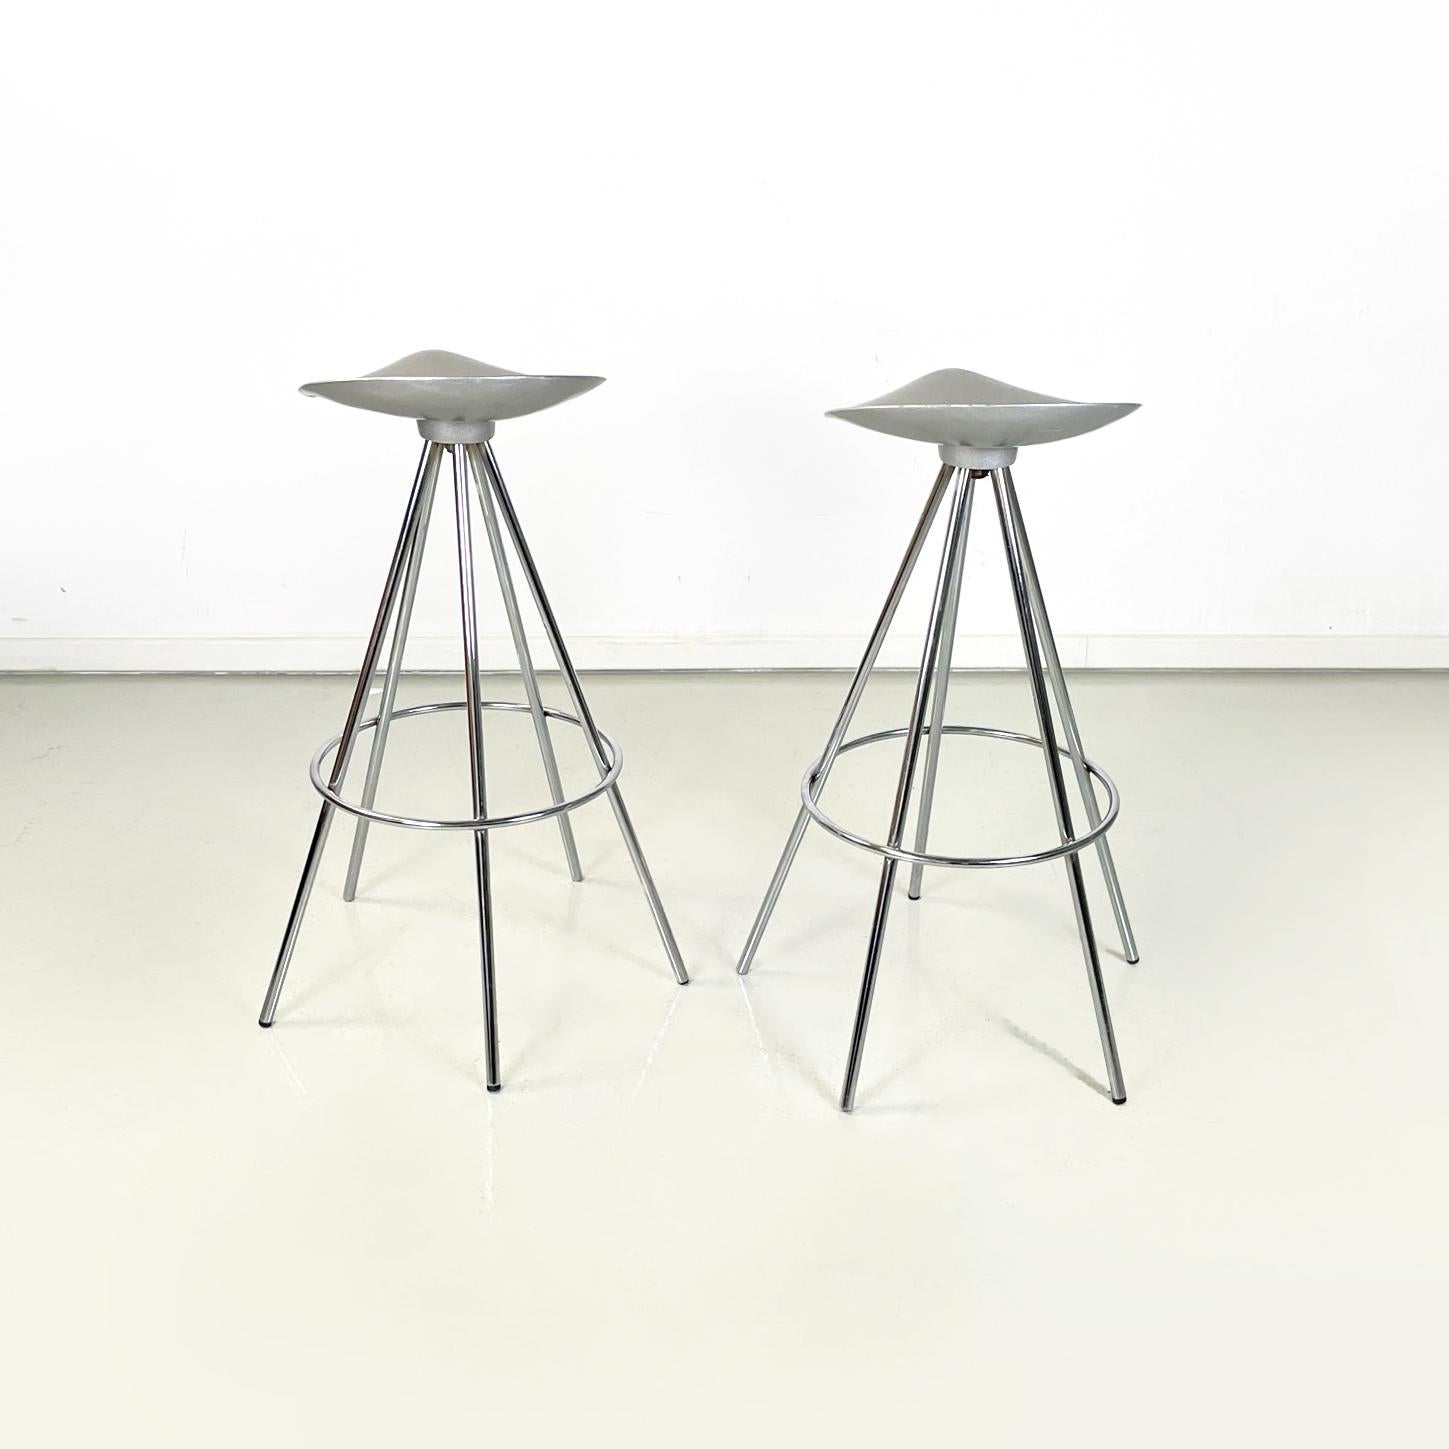 Contemporary Spanish Post-Modern Bar Stools Jamaica by Pepe Cortés for Bd Barcellona, 2000s For Sale